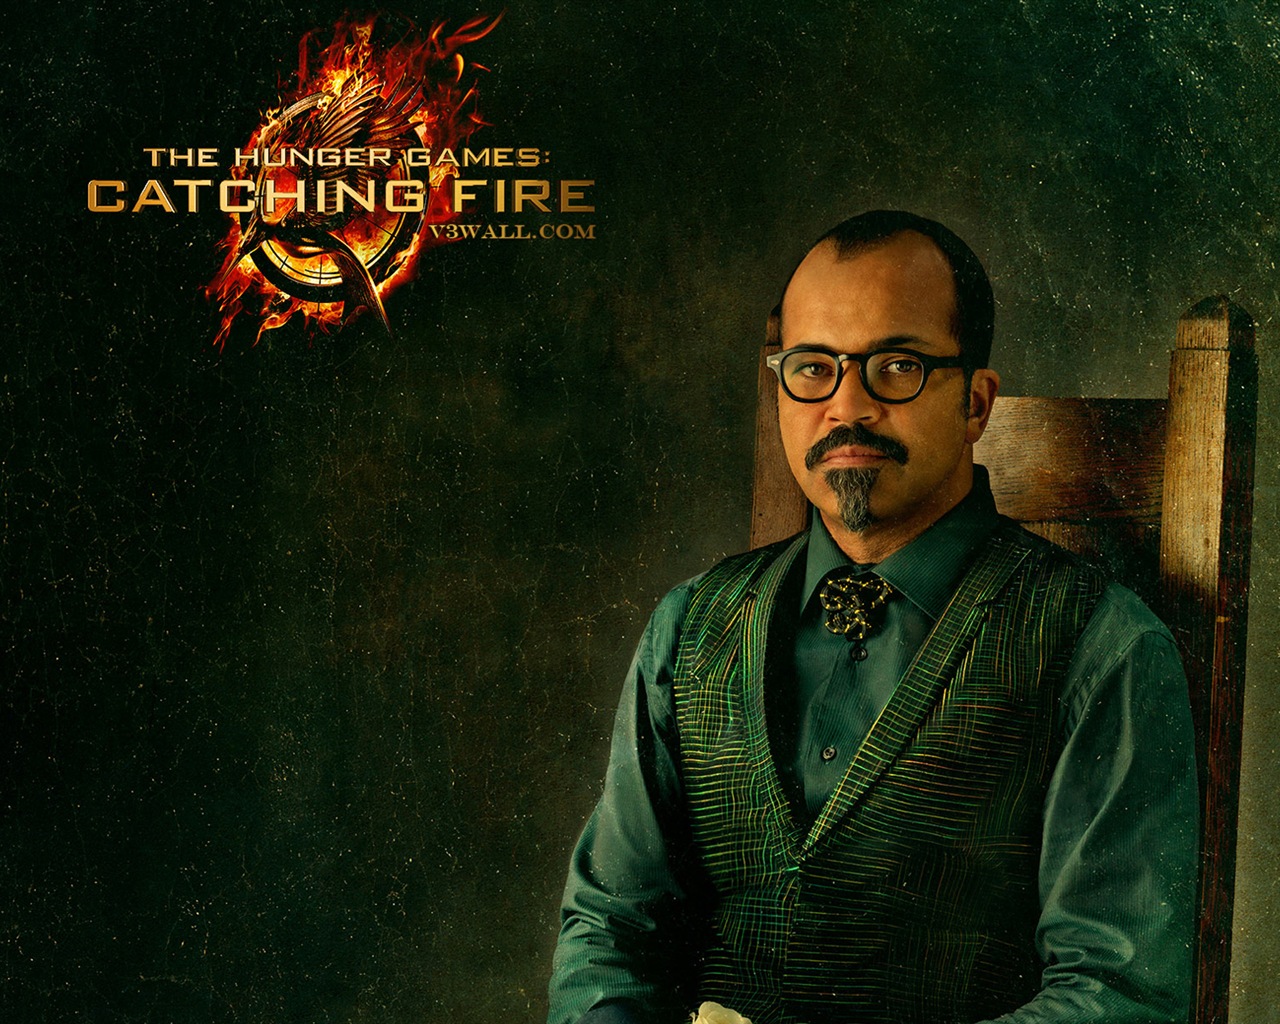 The Hunger Games: Catching Fire wallpapers HD #14 - 1280x1024